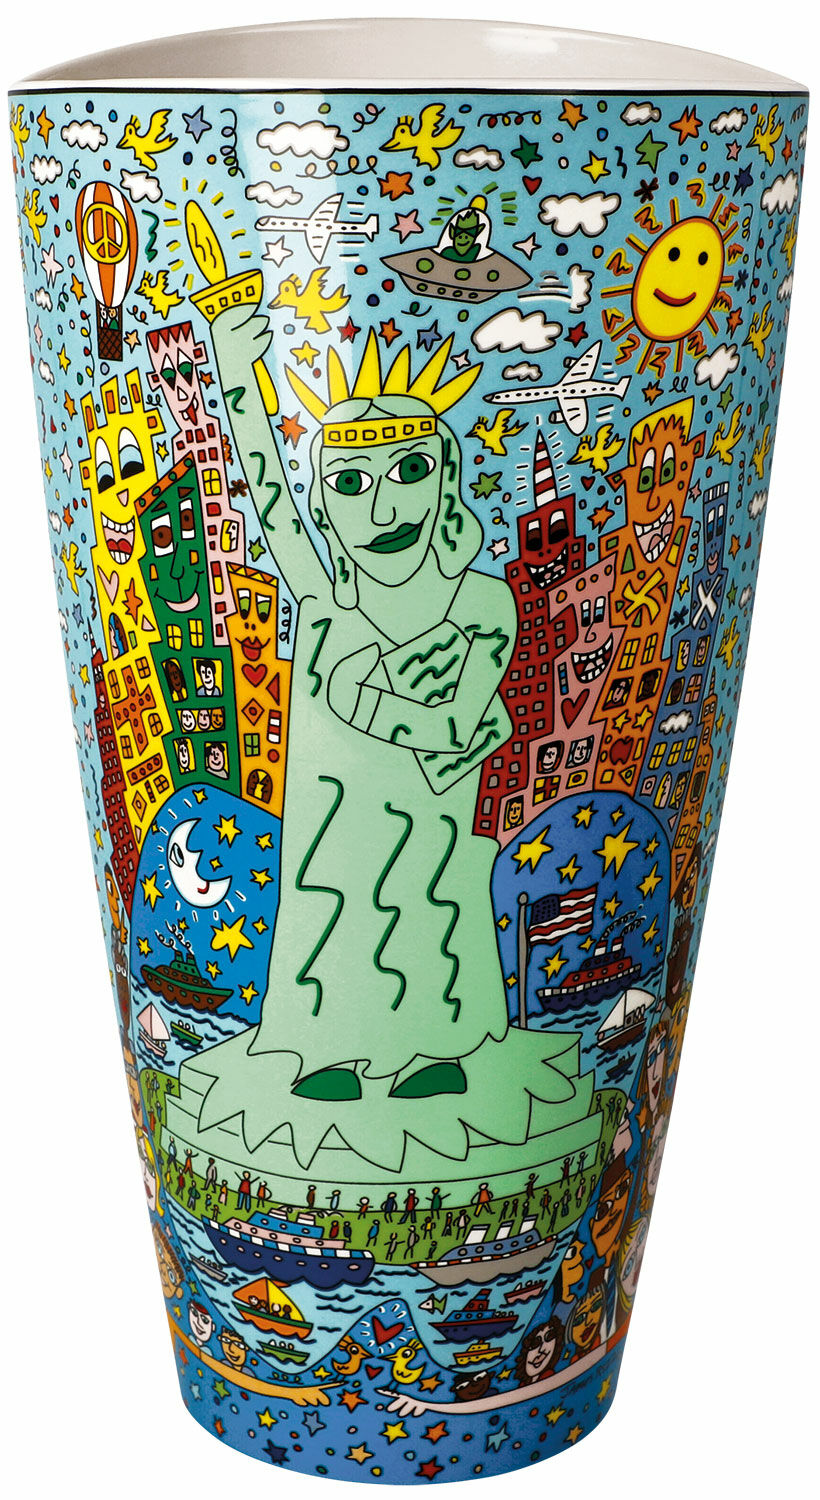 Porcelain vase "The Big Apple is Big on Liberty" by James Rizzi